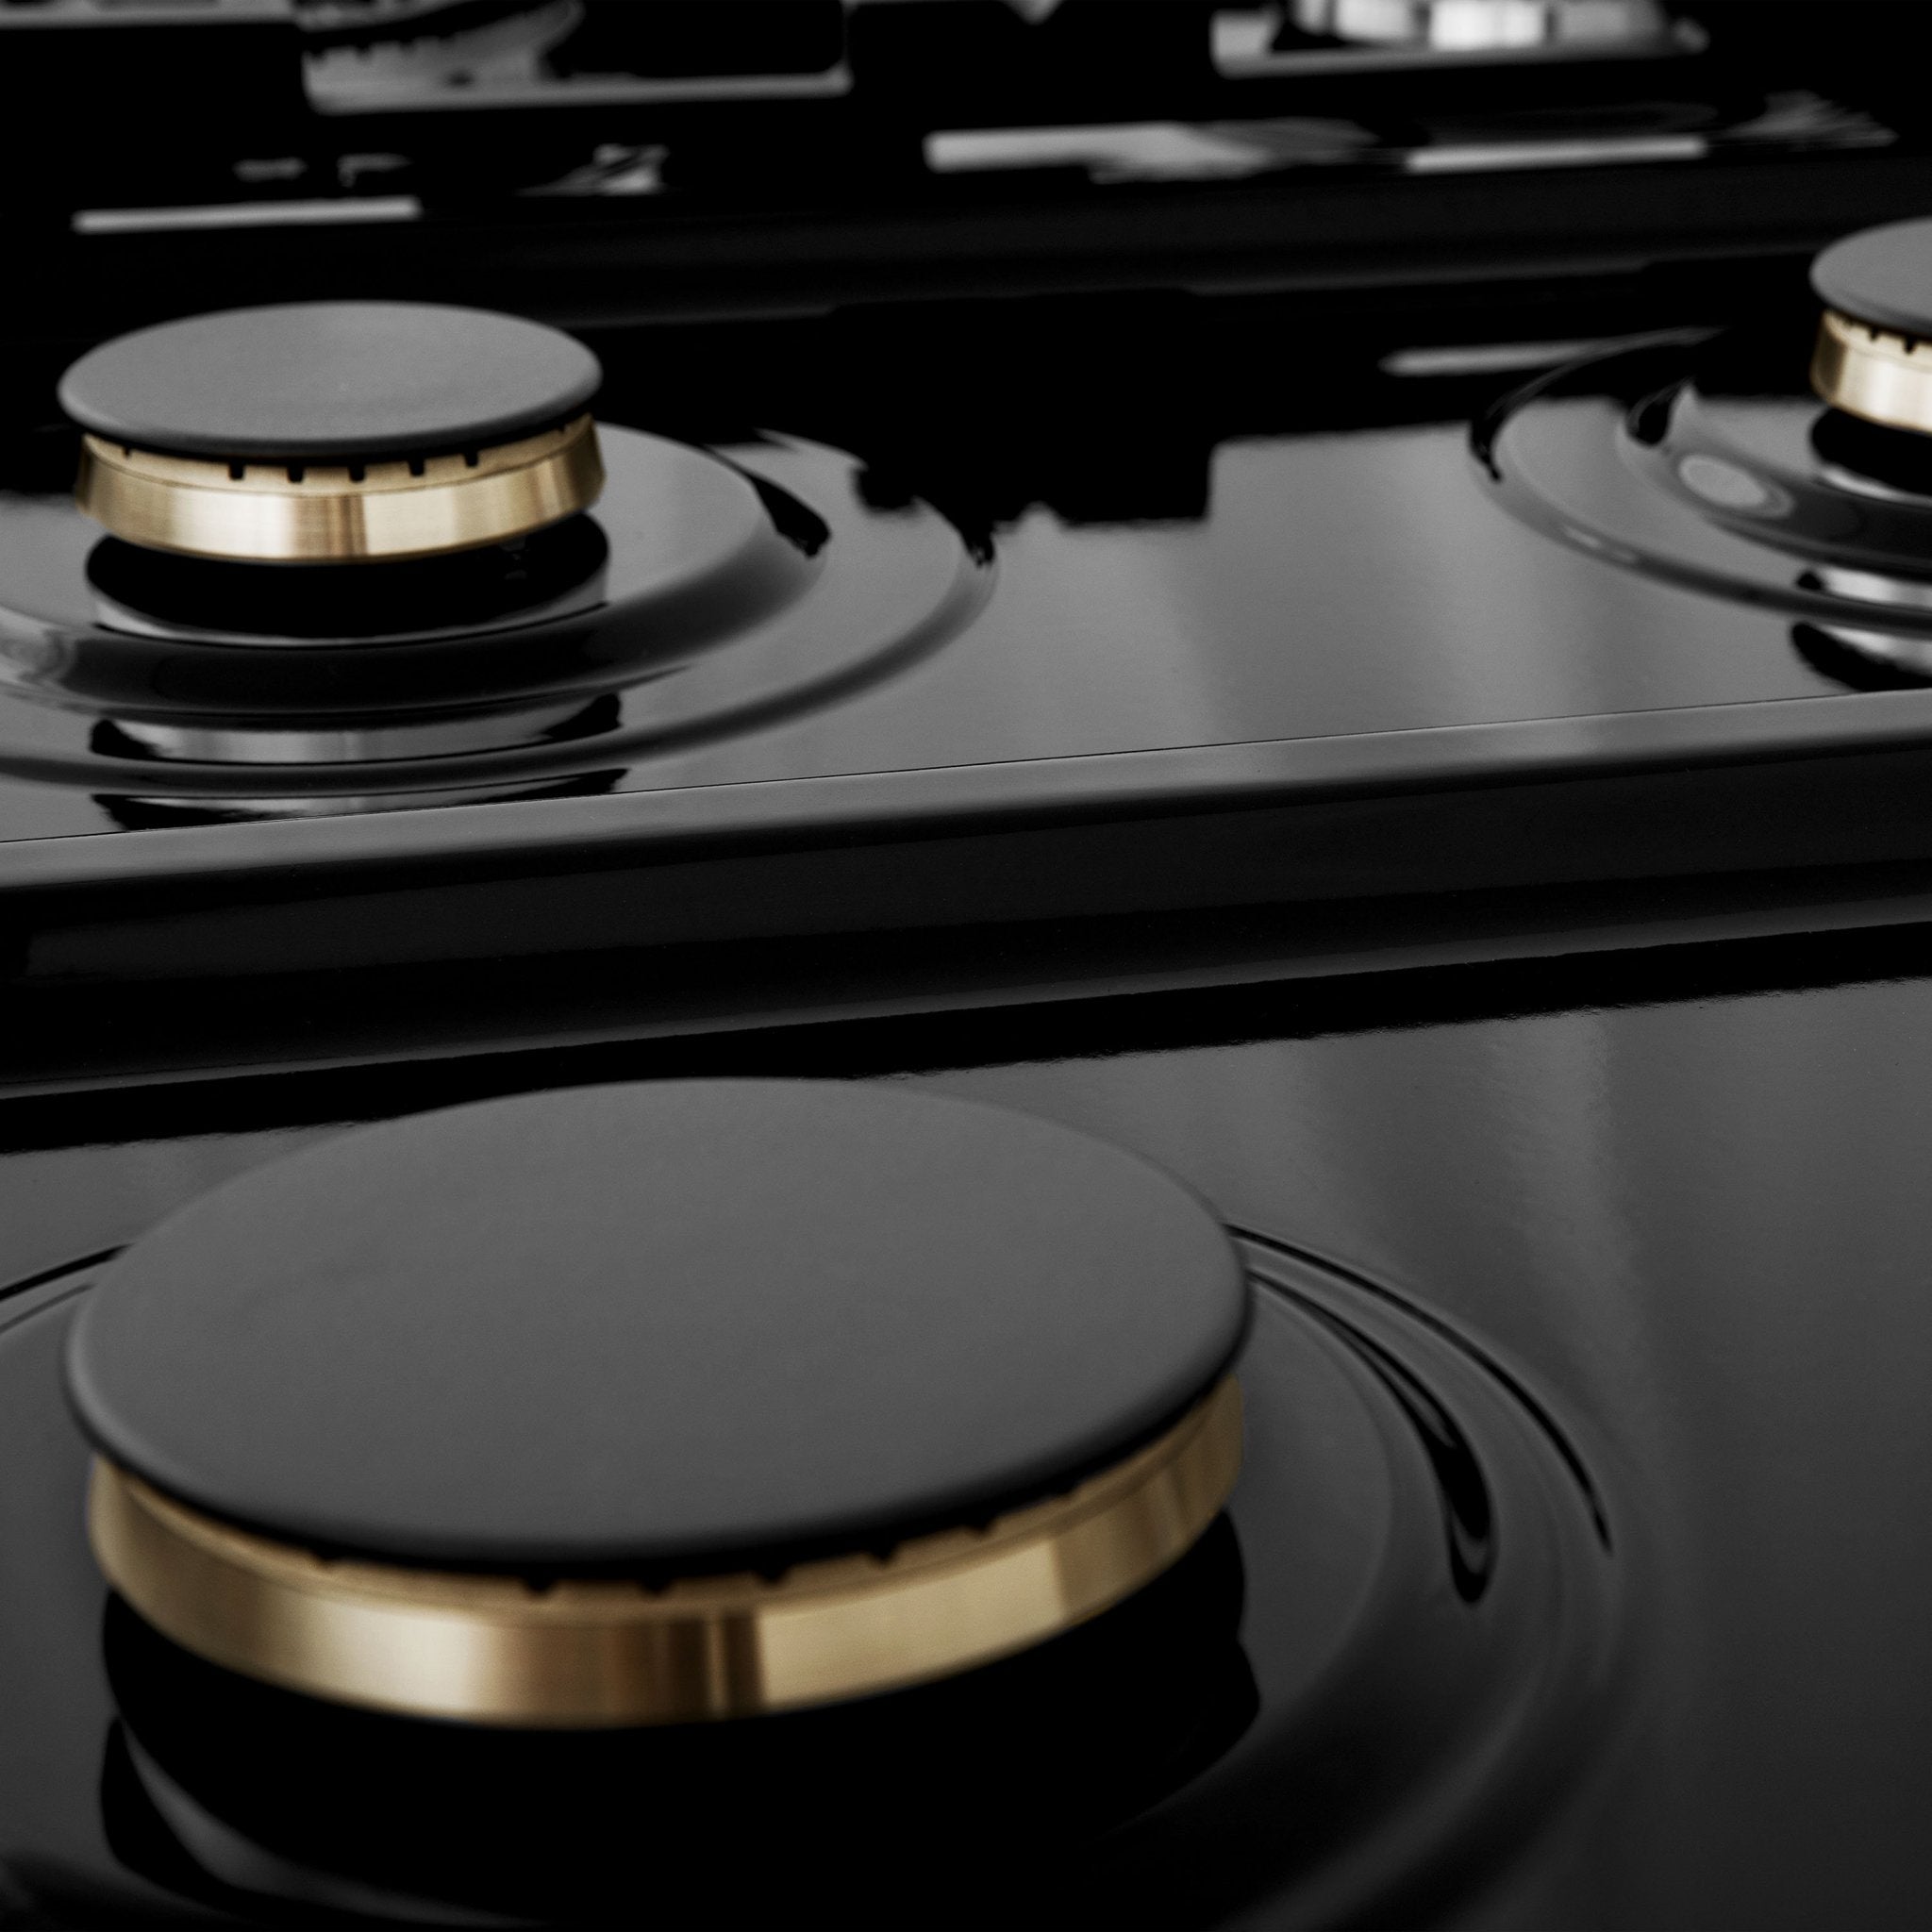 Brass burners on black porcelain cooktop with no grates.